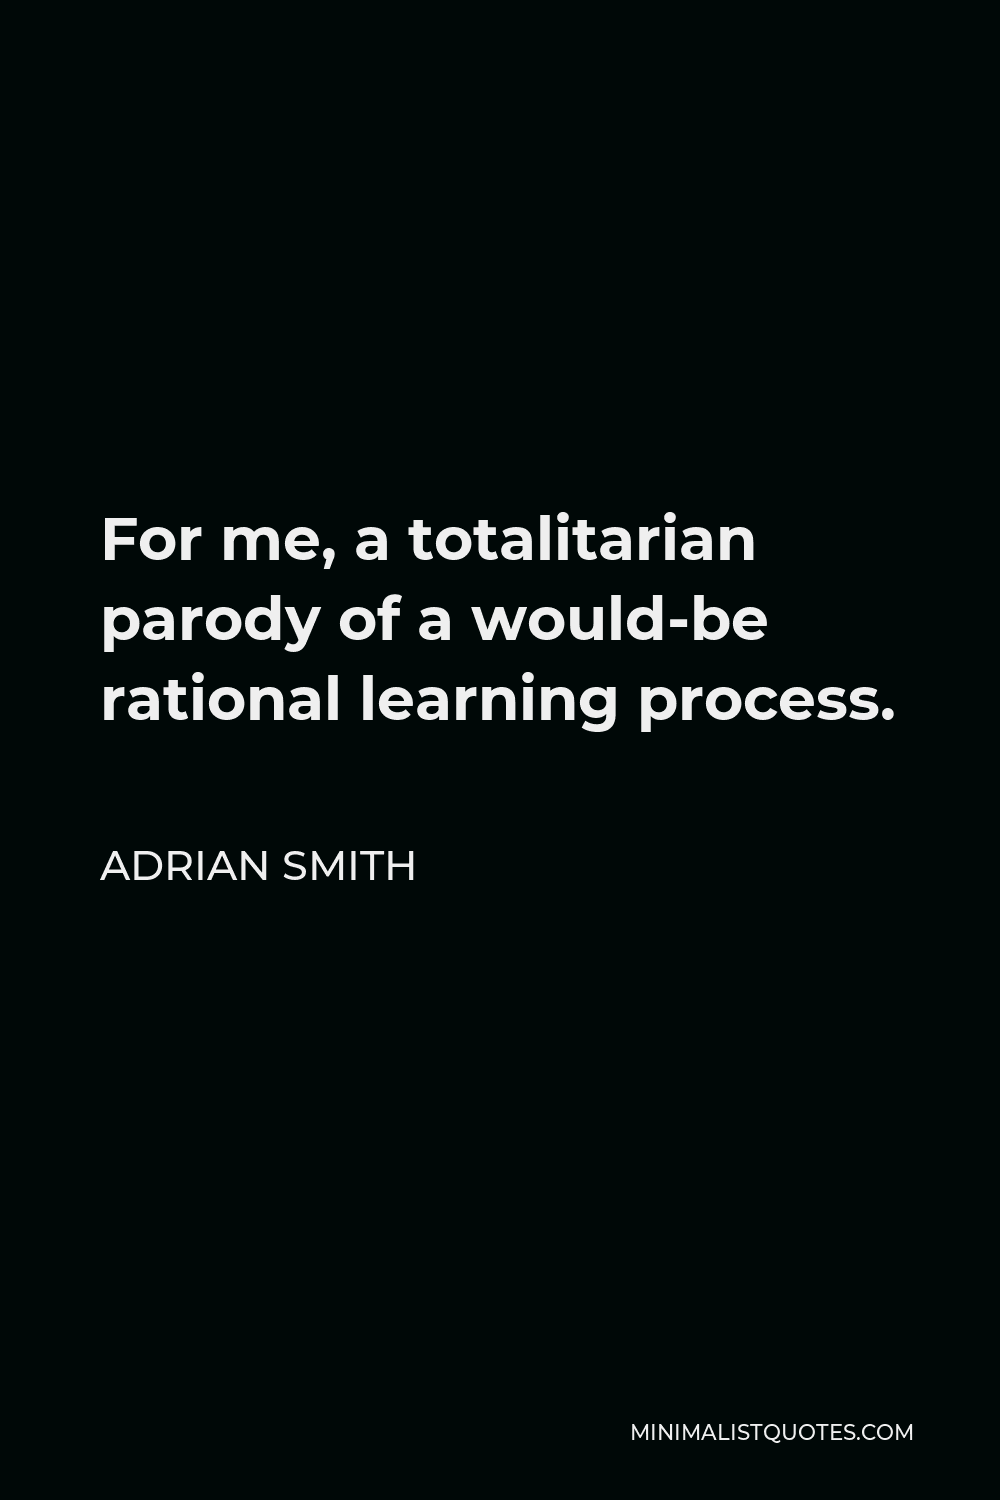 Adrian Smith Quote - For me, a totalitarian parody of a would-be rational learning process.